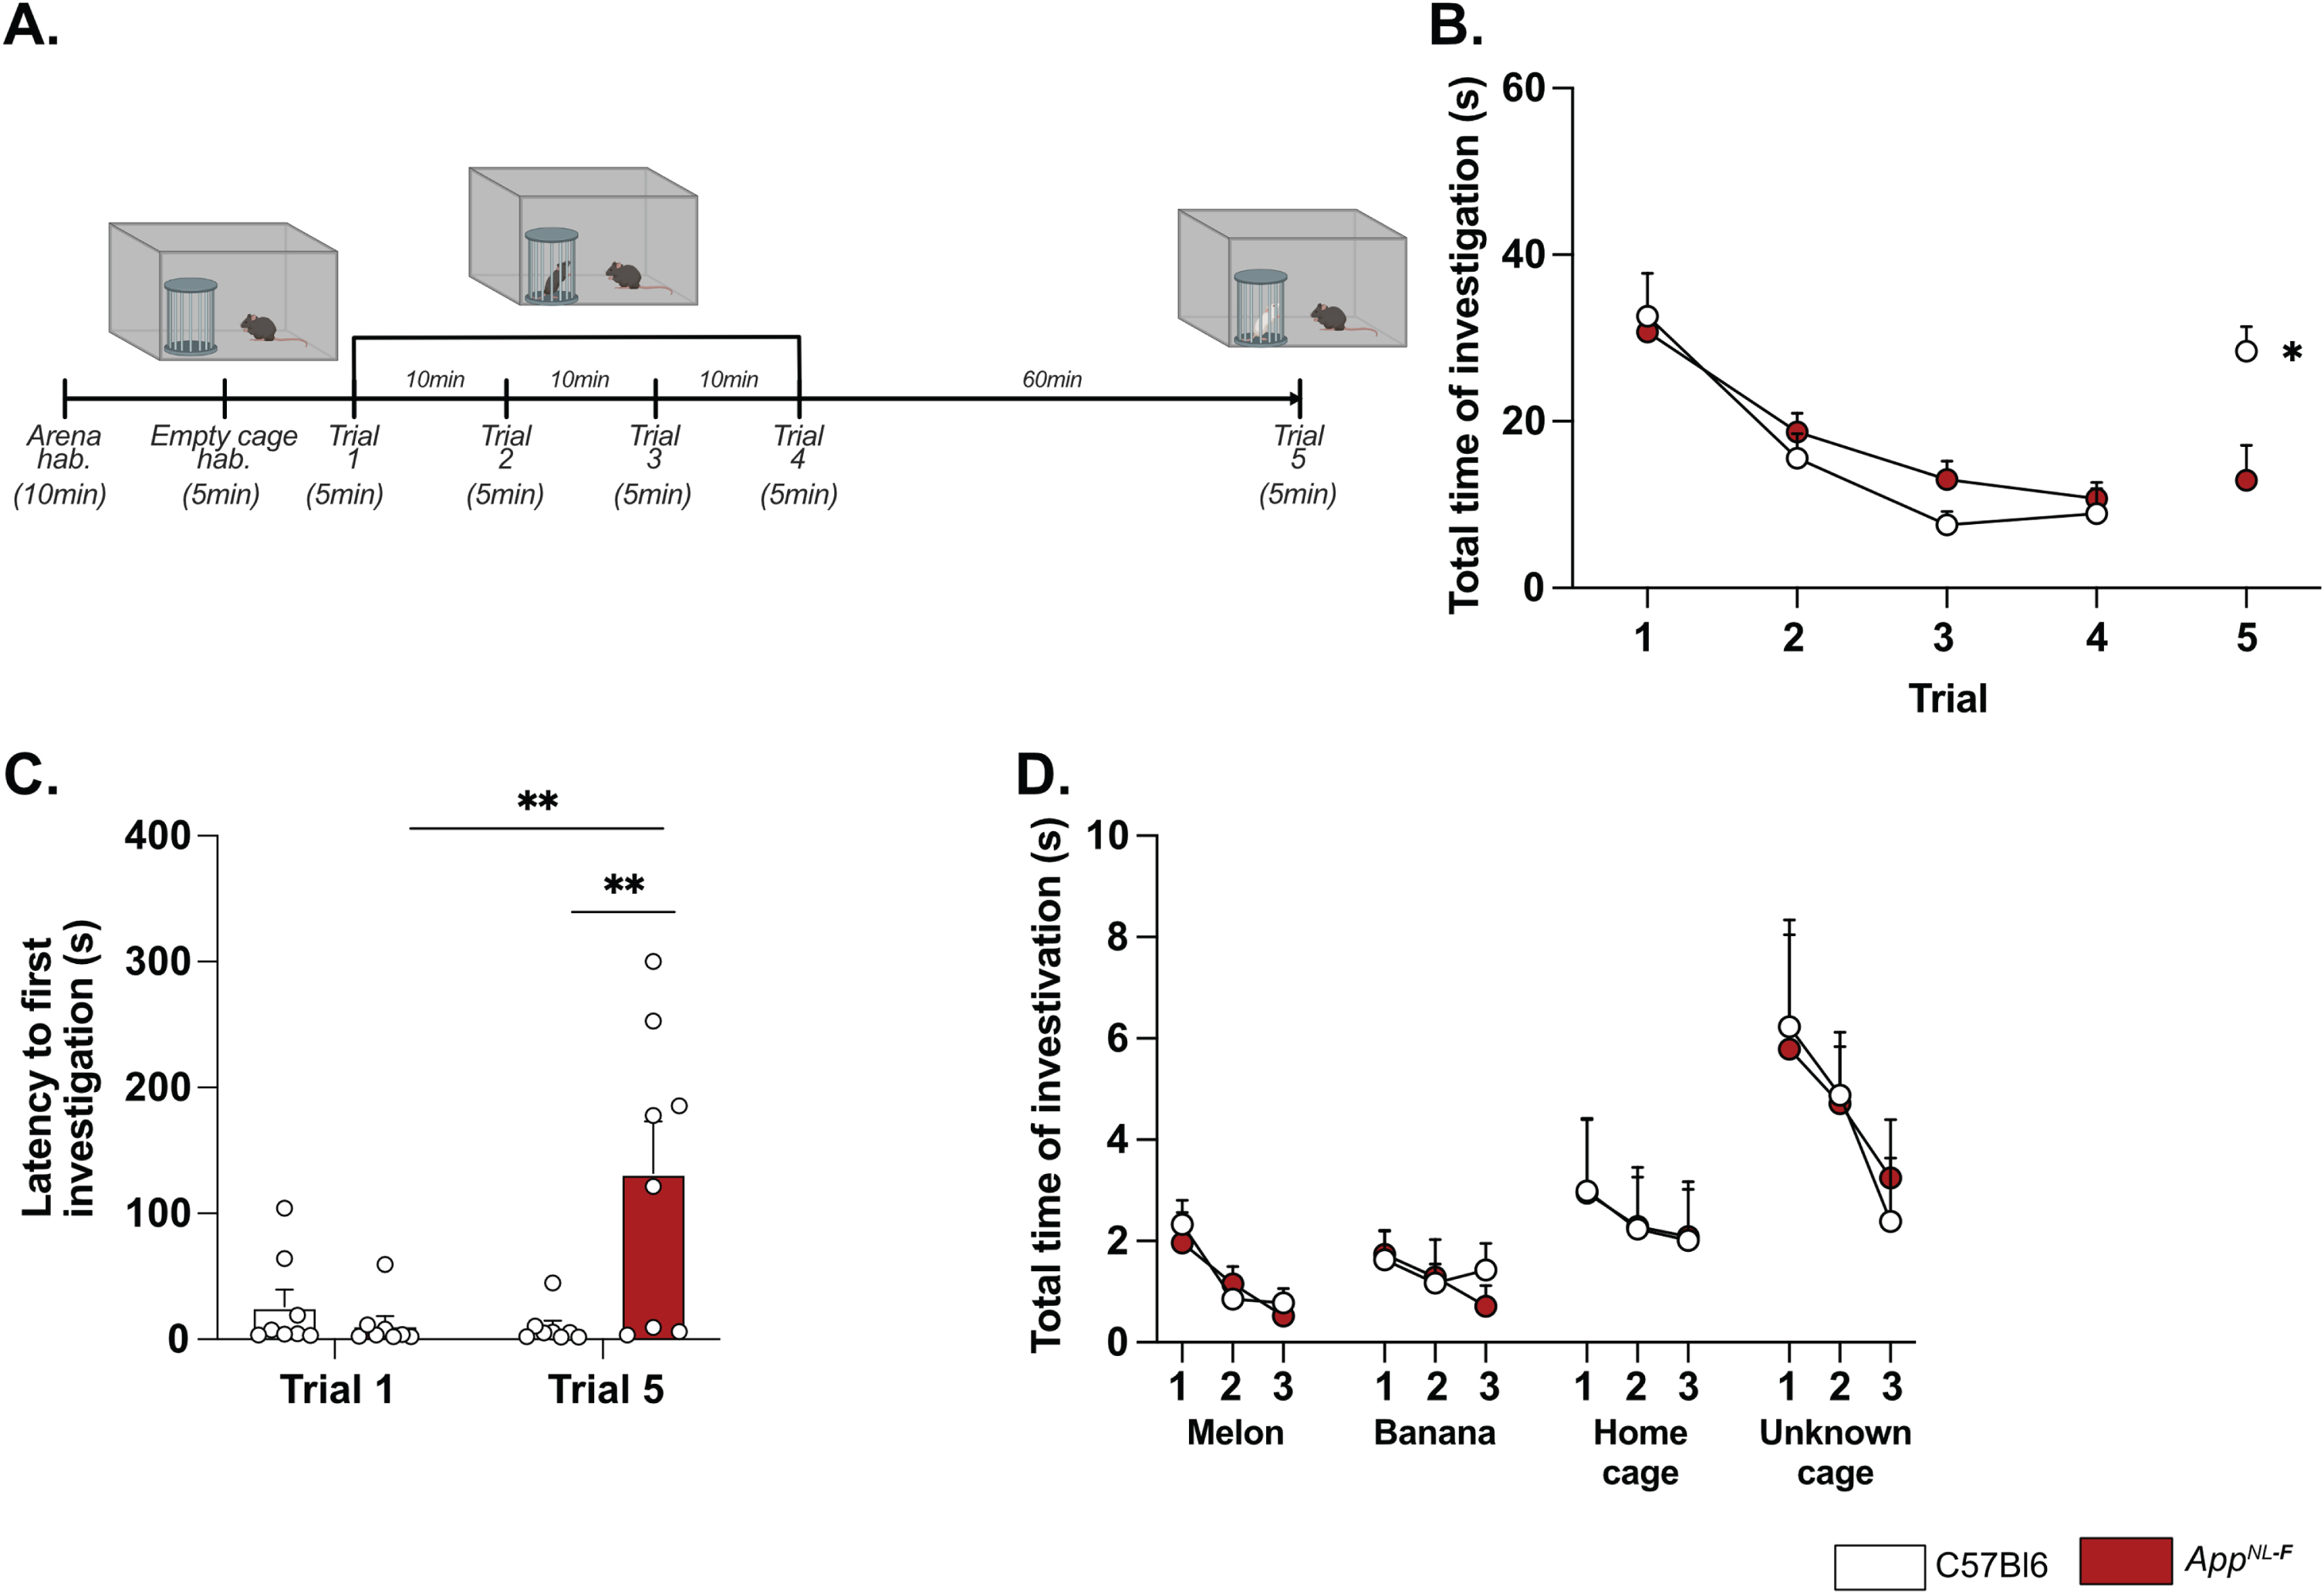 AppNL-F mice shown no social memory impairments but a lack of motivation. In the five-trials social memory test (A), AppNL-F mice show no memory deficits as seen by the progressive decrease in social interactions over four consecutive trials (B). On the fifth trial, when a new animal is presented, C57Bl6 mice regain interest and the time of interaction is increased, whereas the time of interaction is not different in the fifth trial versus the fourth one in AppNL-F mice. Two-way ANOVA for repeated measured with the genotype and the trial as the main factors. Bonferroni multiple comparison *p < 0.05 statistically different trial 4 versus trial 5. Latency to first investigation (C) is similar between genotypes in the first trial. However, it is significantly increased in AppNL-F on the fifth trial compared to C57Bl6 and to AppNL-F in trial 1. Two-way ANOVA for repeated measured with the genotype and the trial as the main factors. Bonferroni multiple comparison; Bonferroni multiple comparison: **p < 0.01: statistically different as shown. C57Bl6: n = 8, AppNL-F: n = 8. In the olfactory habituation/dishabituation test (D), we presented four different odors for three times 2 min each. The time of interaction with the probe was similar in C57Bl6 and AppNL-F at all timepoints and for all odors. C57Bl6: n = 9, AppNL-F: n = 10.